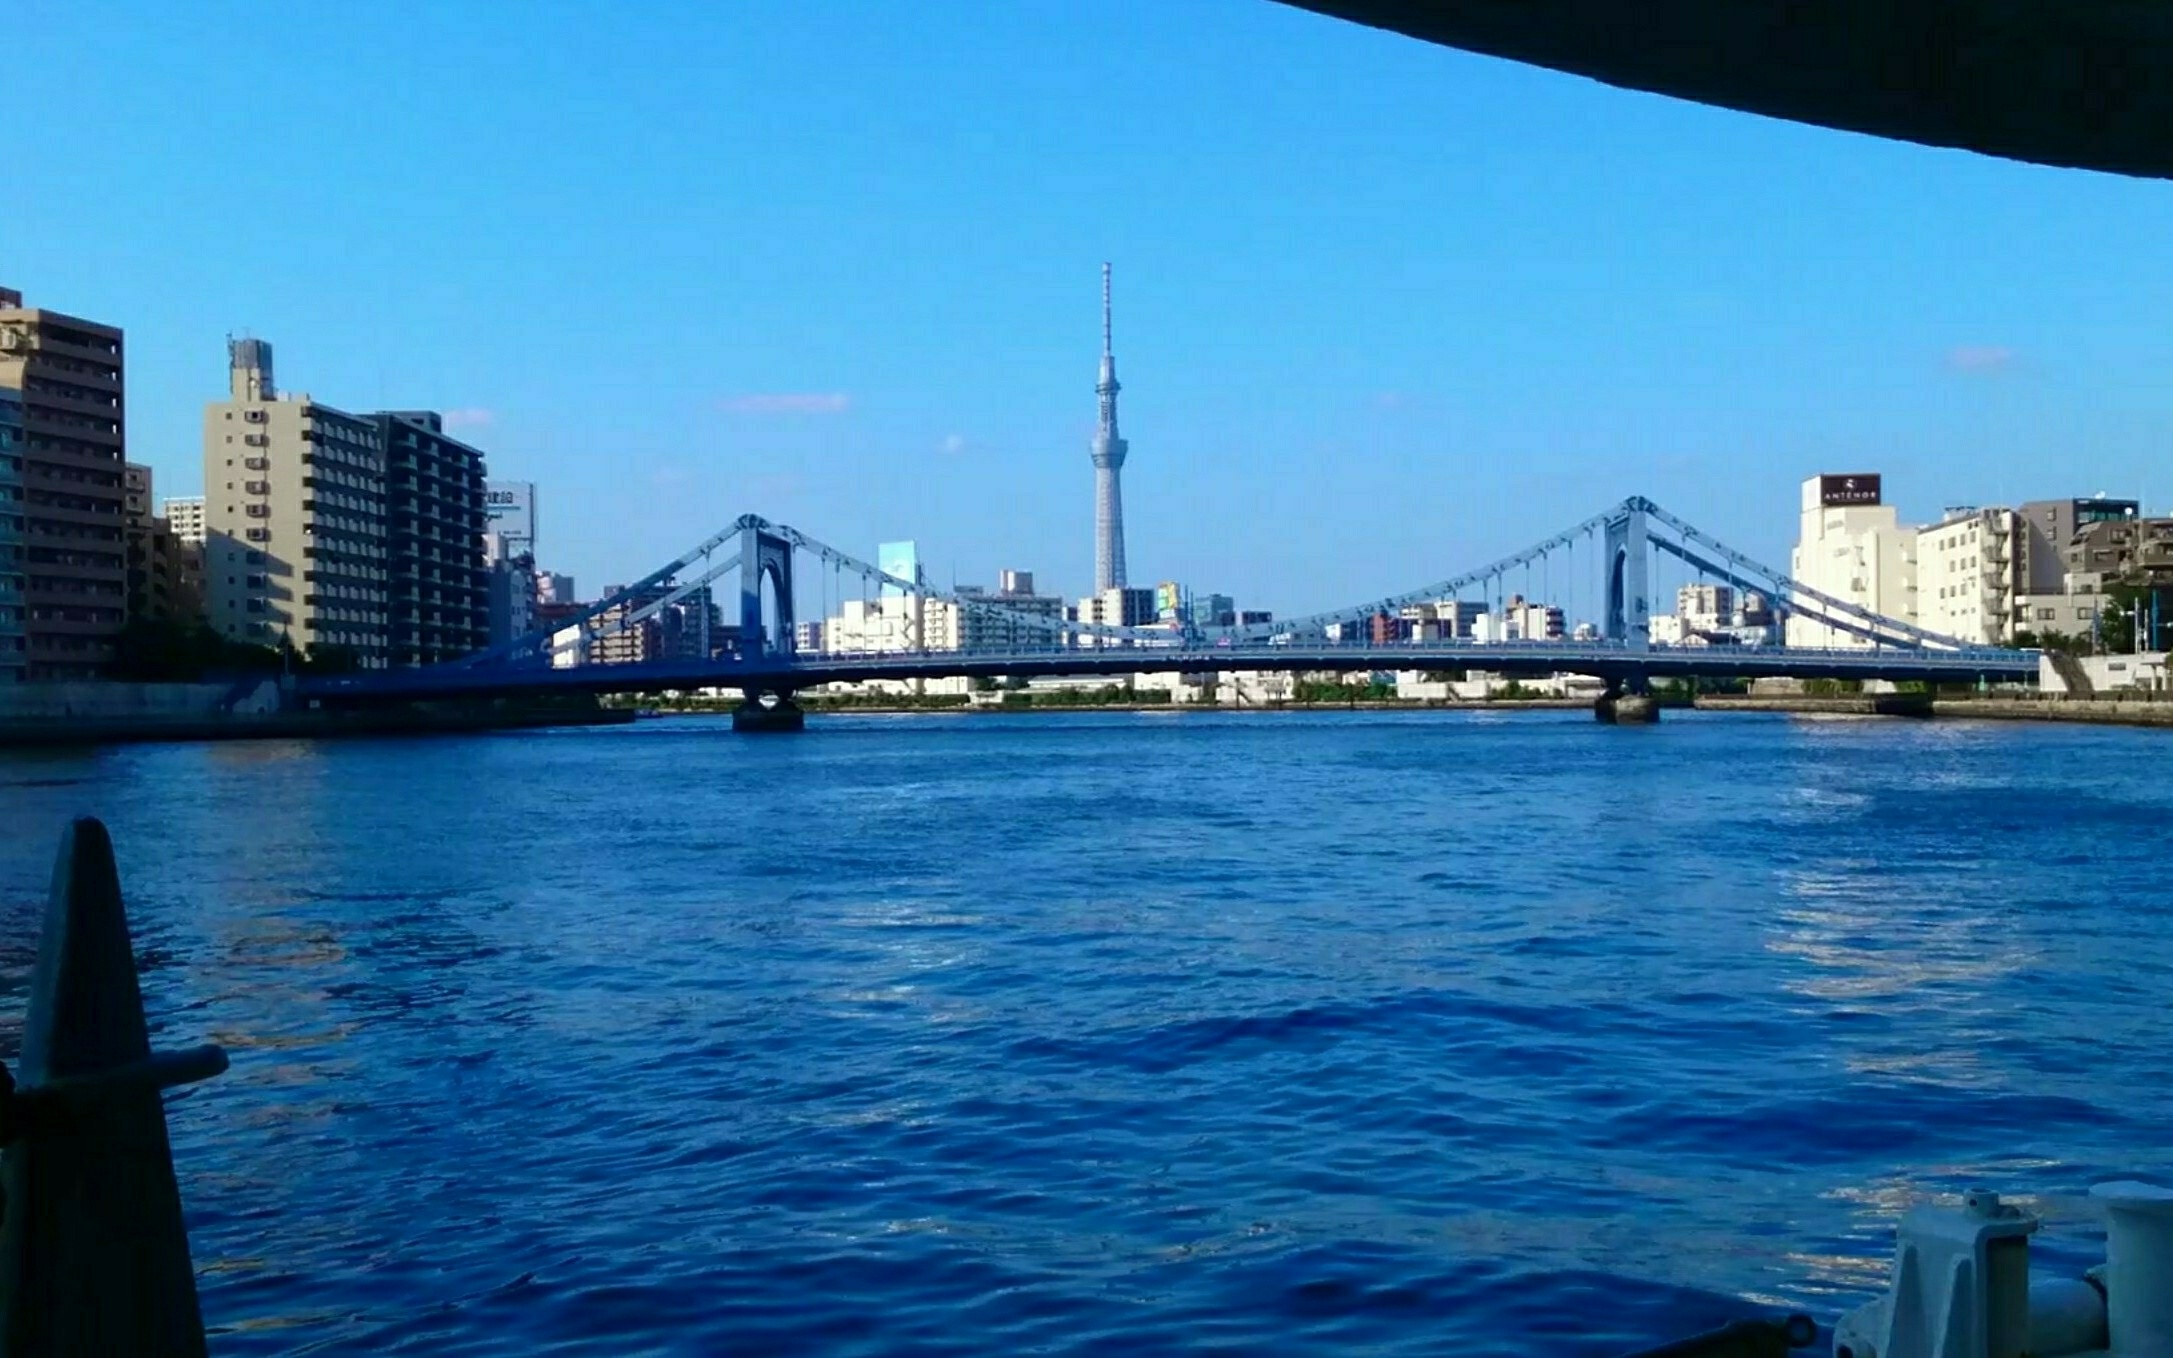 Tokyo Skytree came into sight after passing under many bridges!!